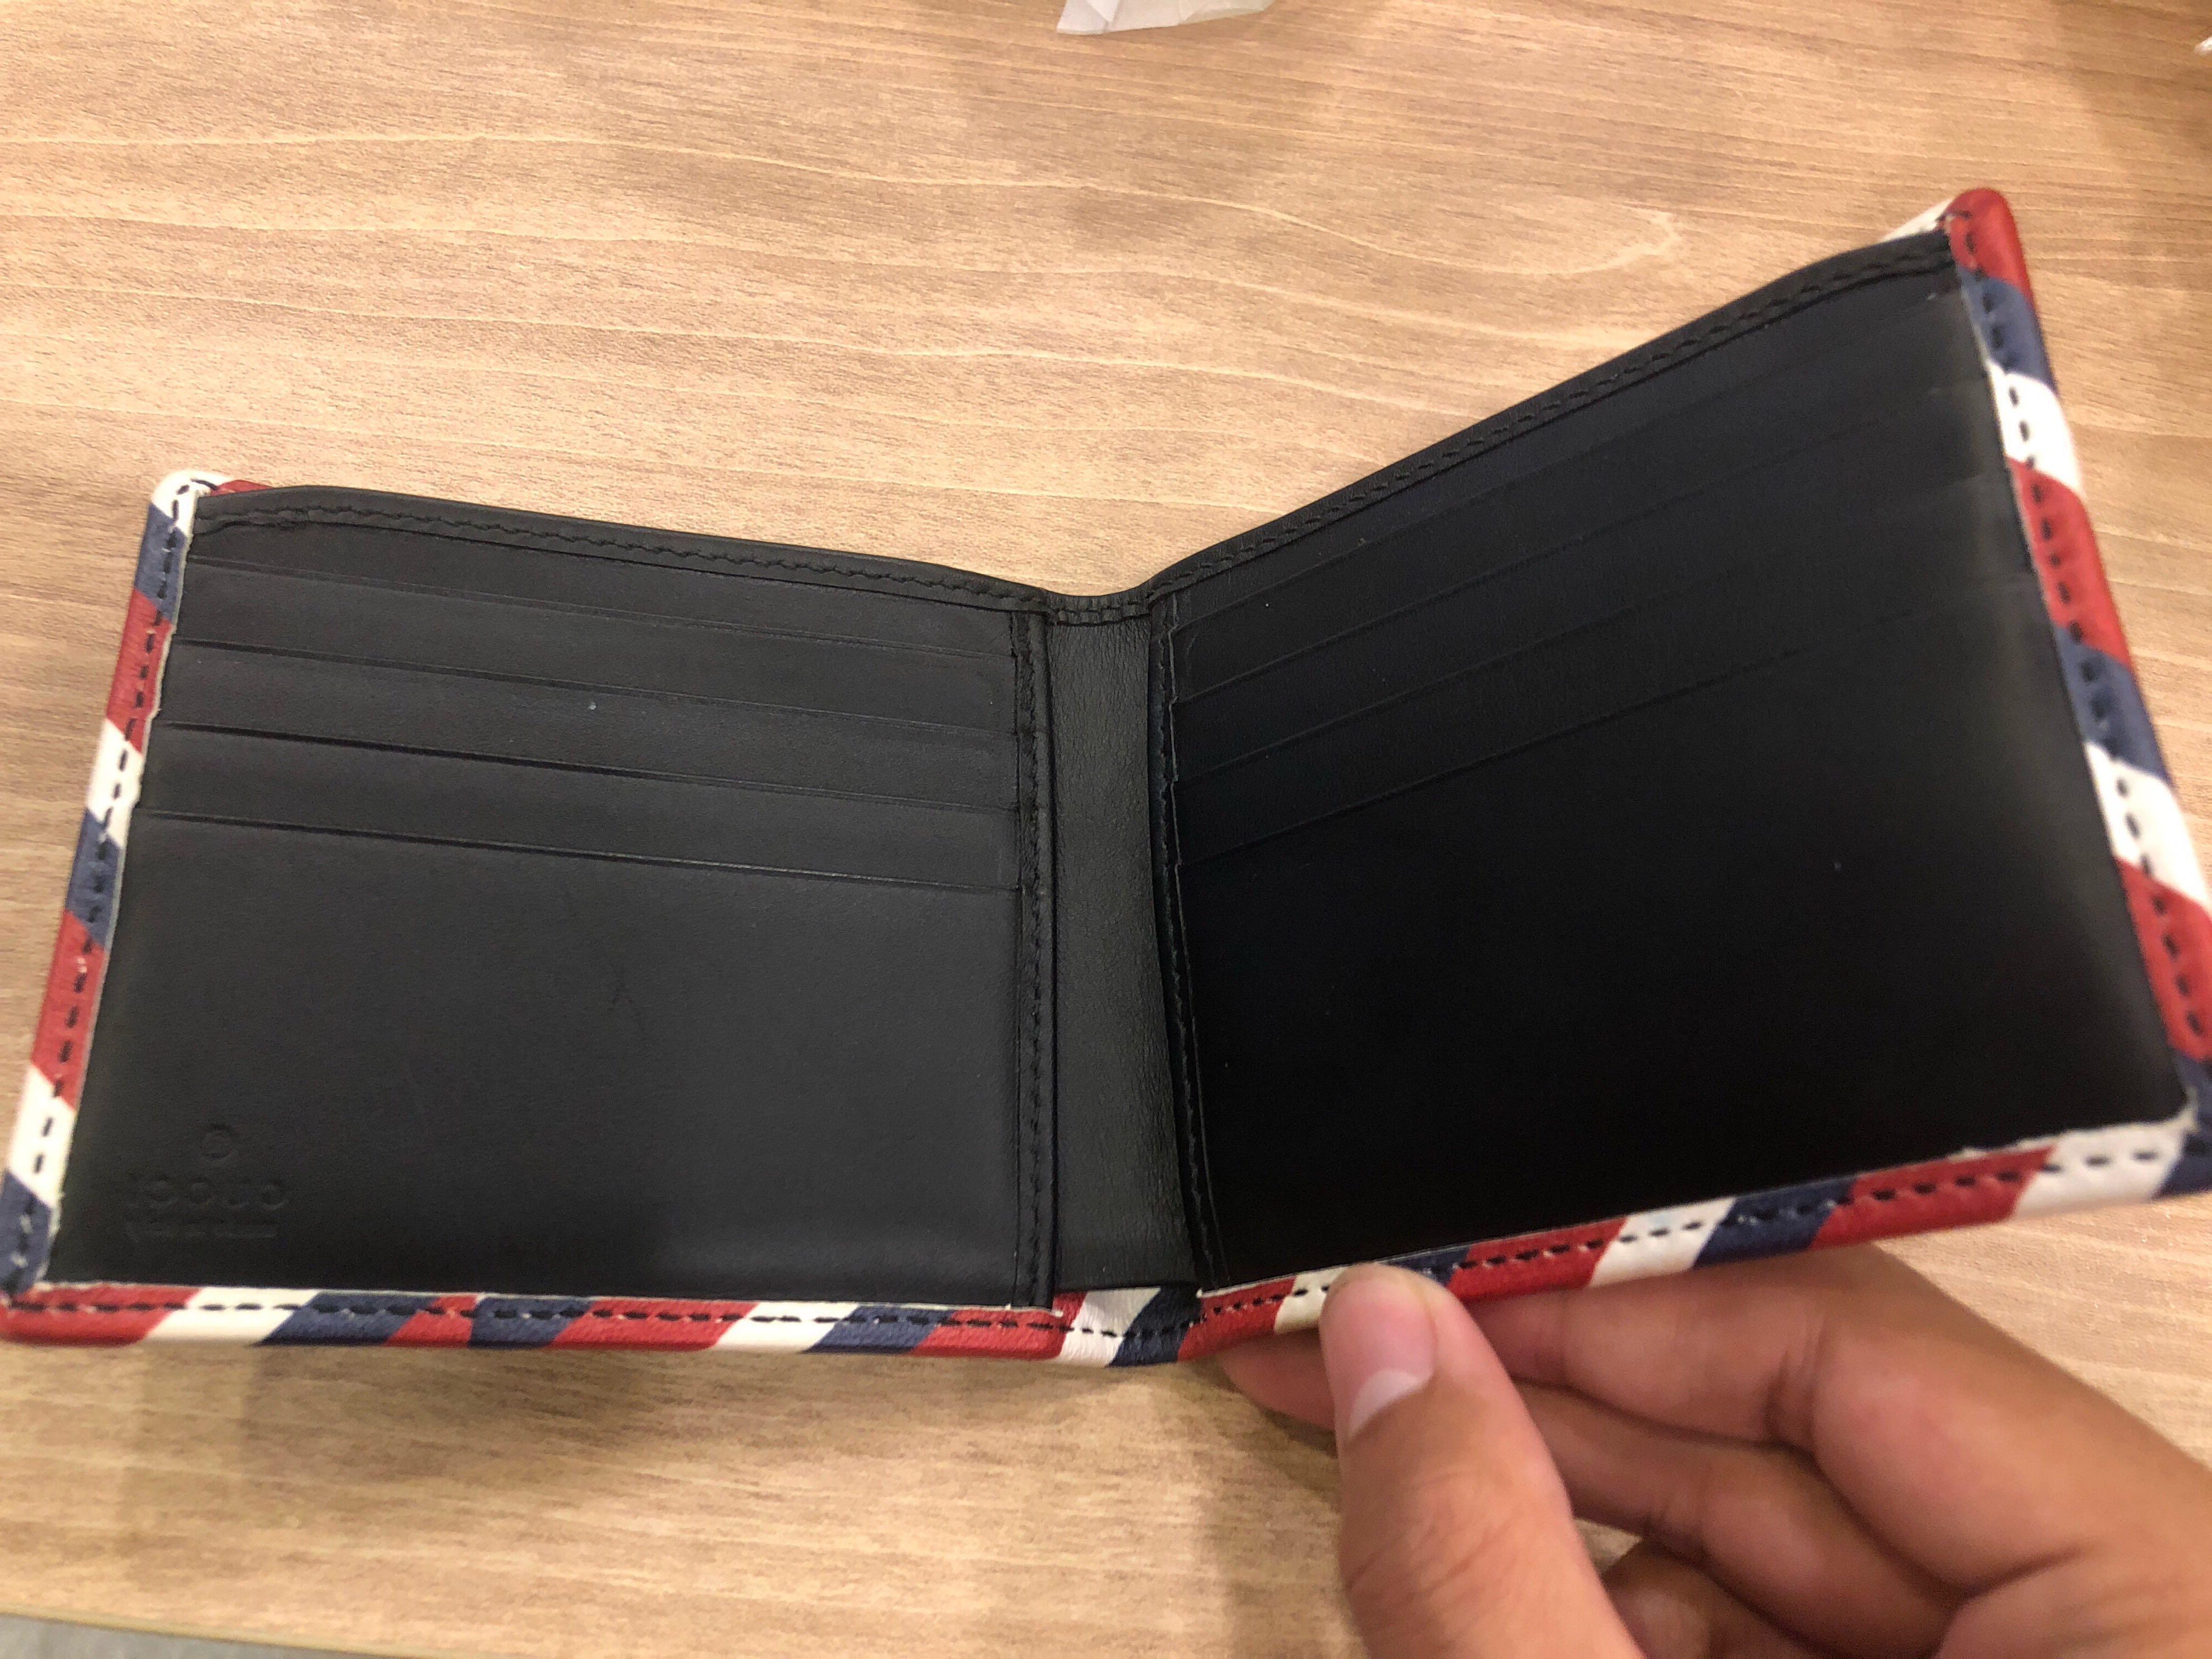 gucci night courrier gg supreme wallet